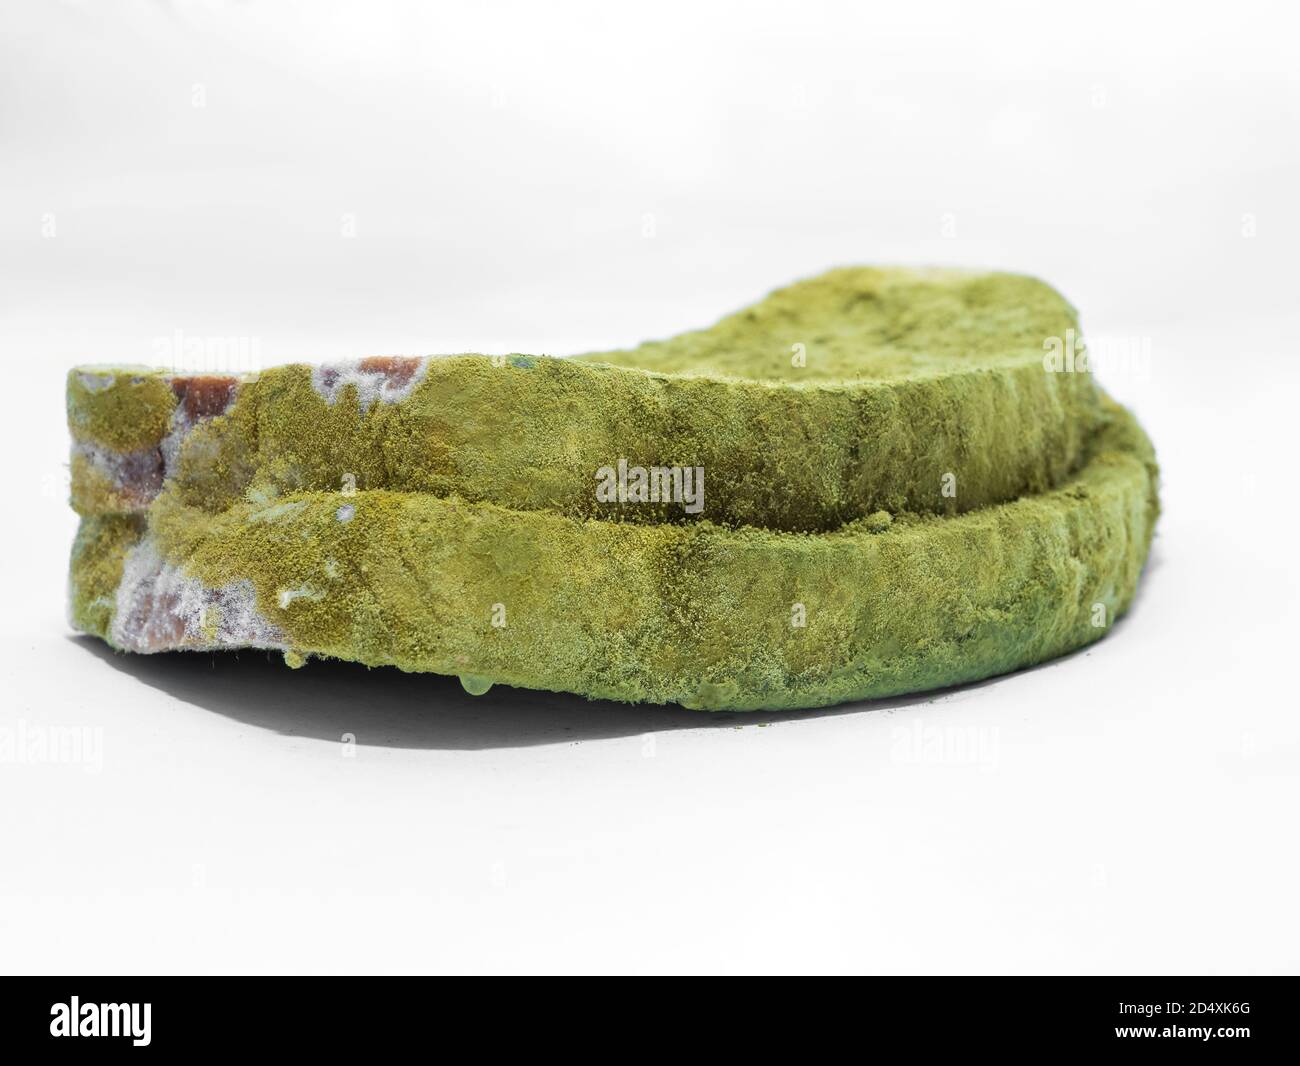 A piece of bread covered with green mold on a white background isolate. Stock Photo